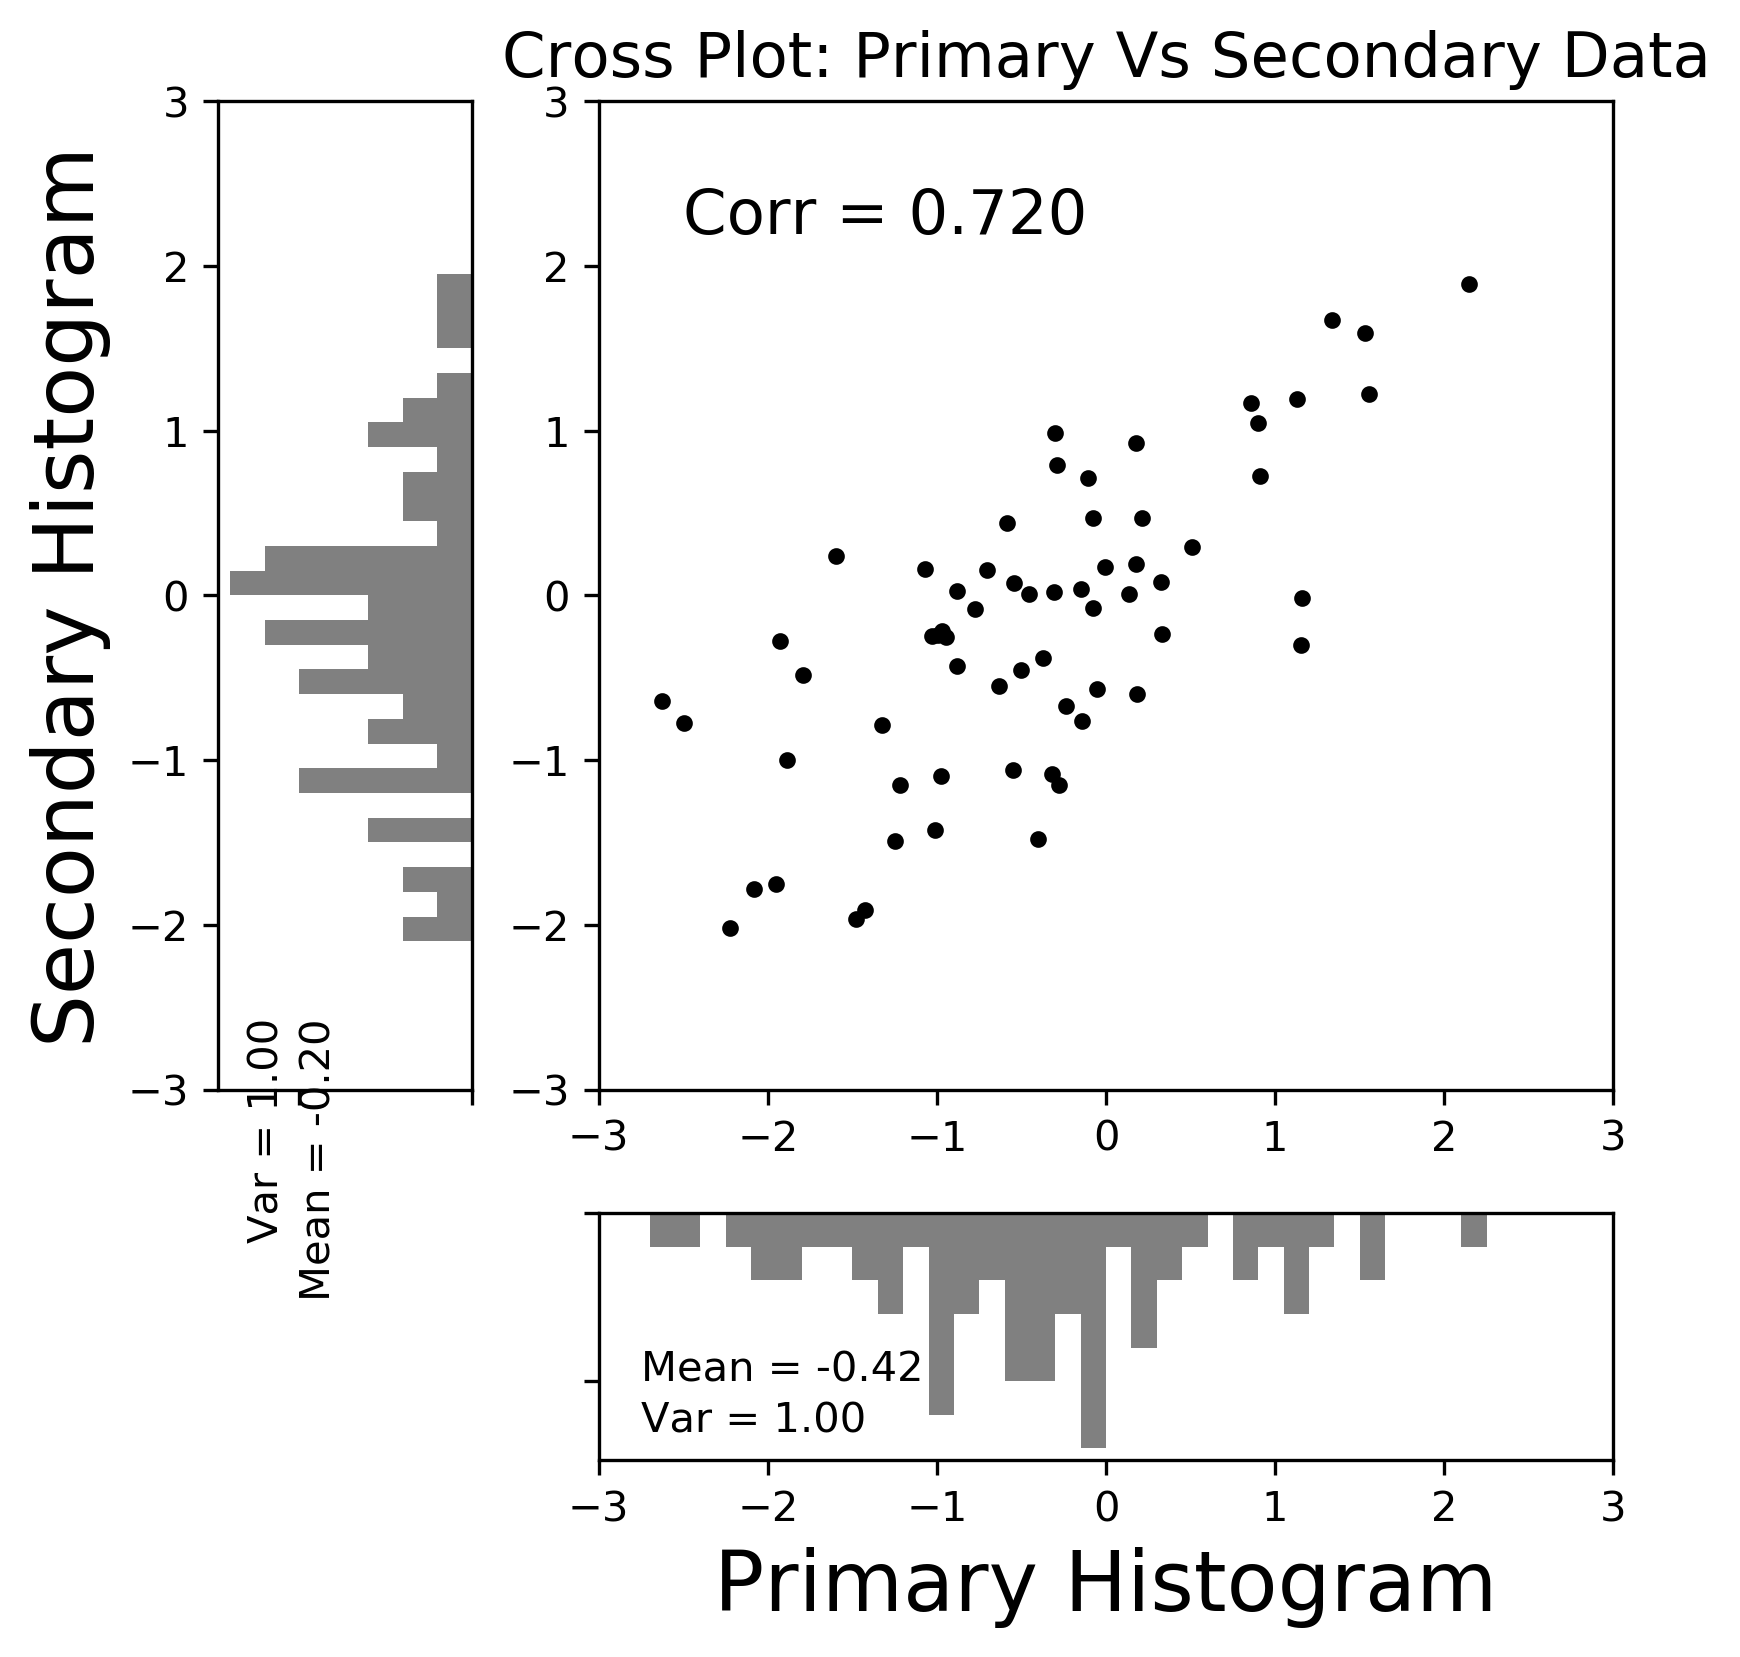 Cross plot of primary and secondary data.